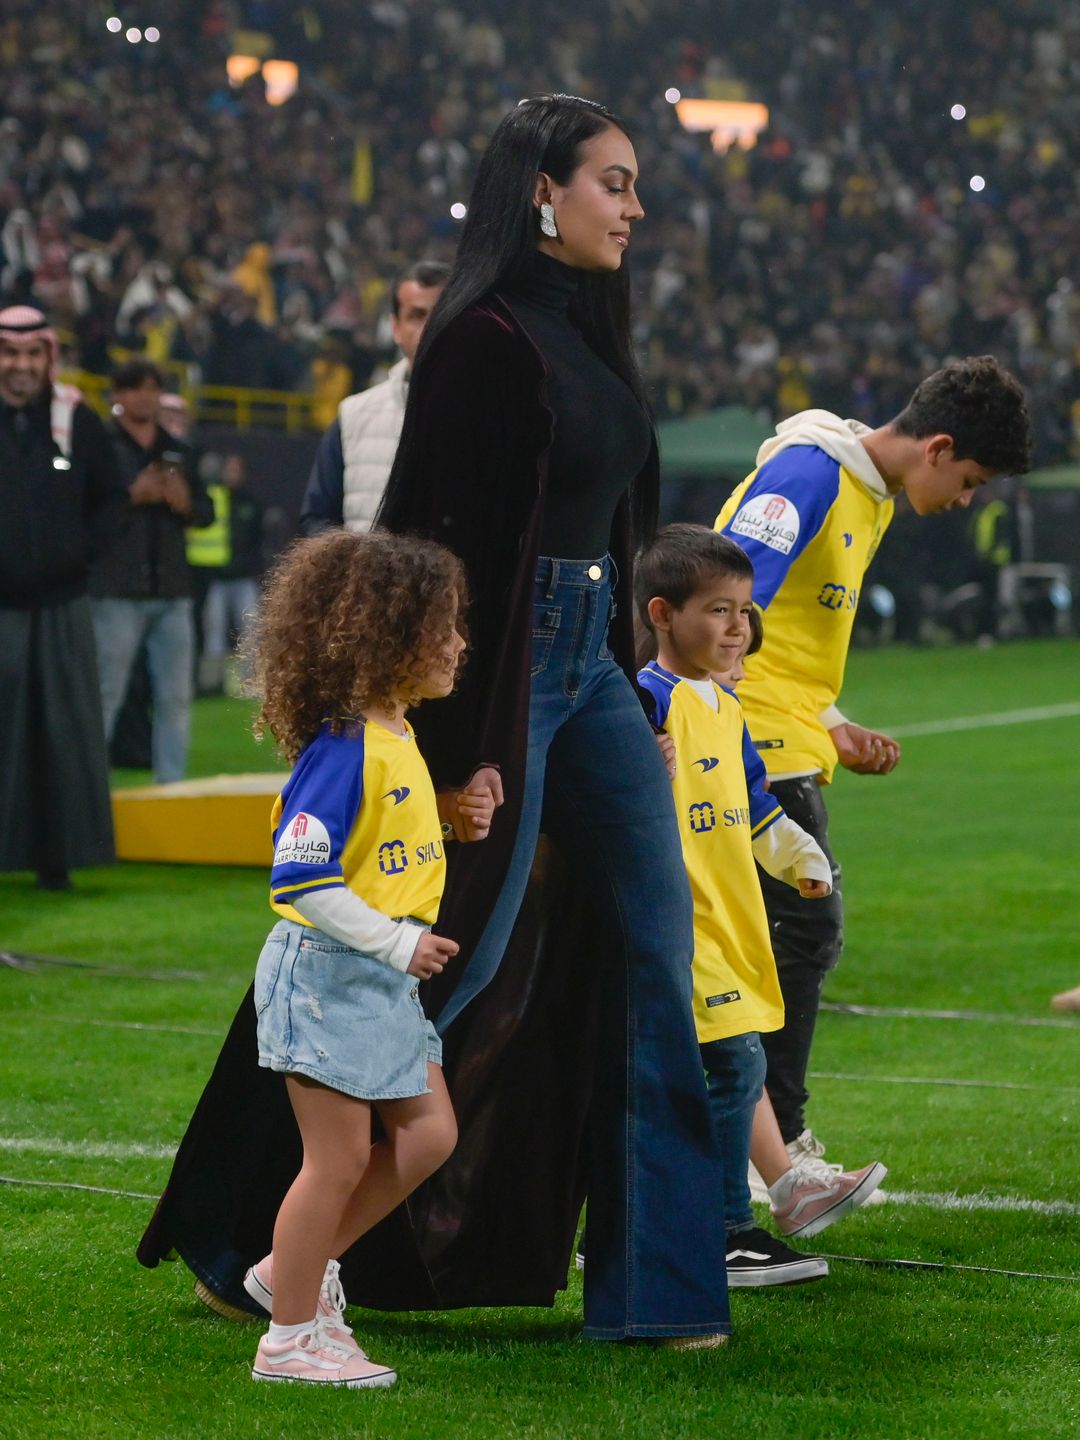 Georgina Rodriguez, wife of Cristiano Ronaldo walks out with her children during the official unveiling of Cristiano Ronaldo as an Al Nassr player at Mrsool Park Stadium in a pair of blue jeans and a black turtleneck 